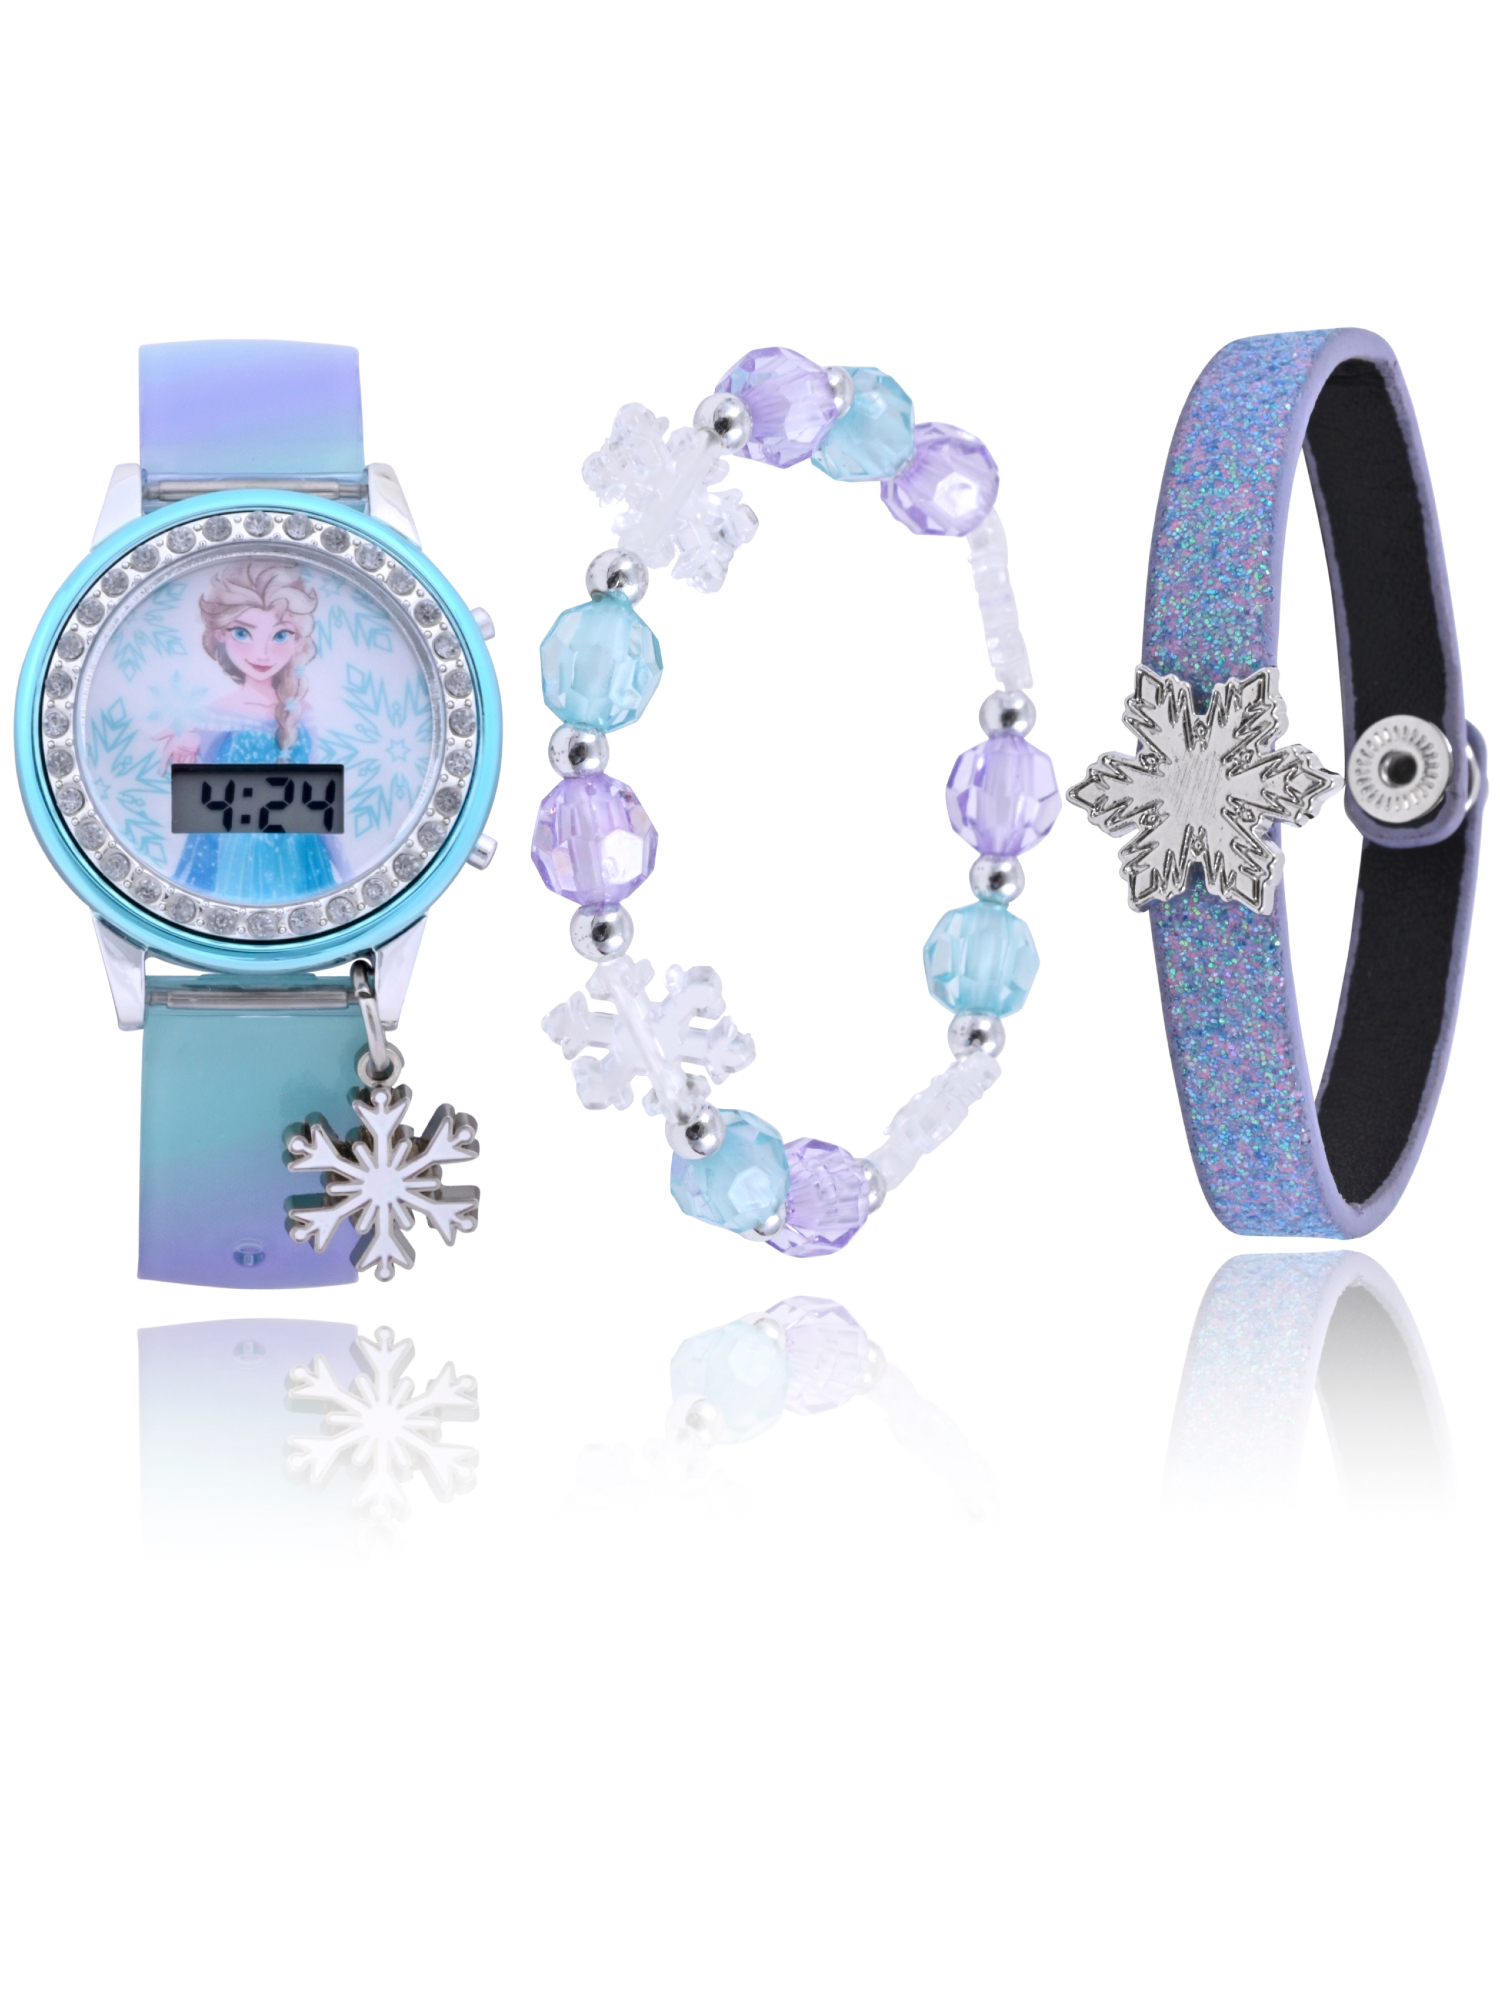 Disney Frozen Girls Flashing LCD Blue Ombre Silicone Watch, Bracelet and Hair Accessory 3 Piece Set - image 1 of 6